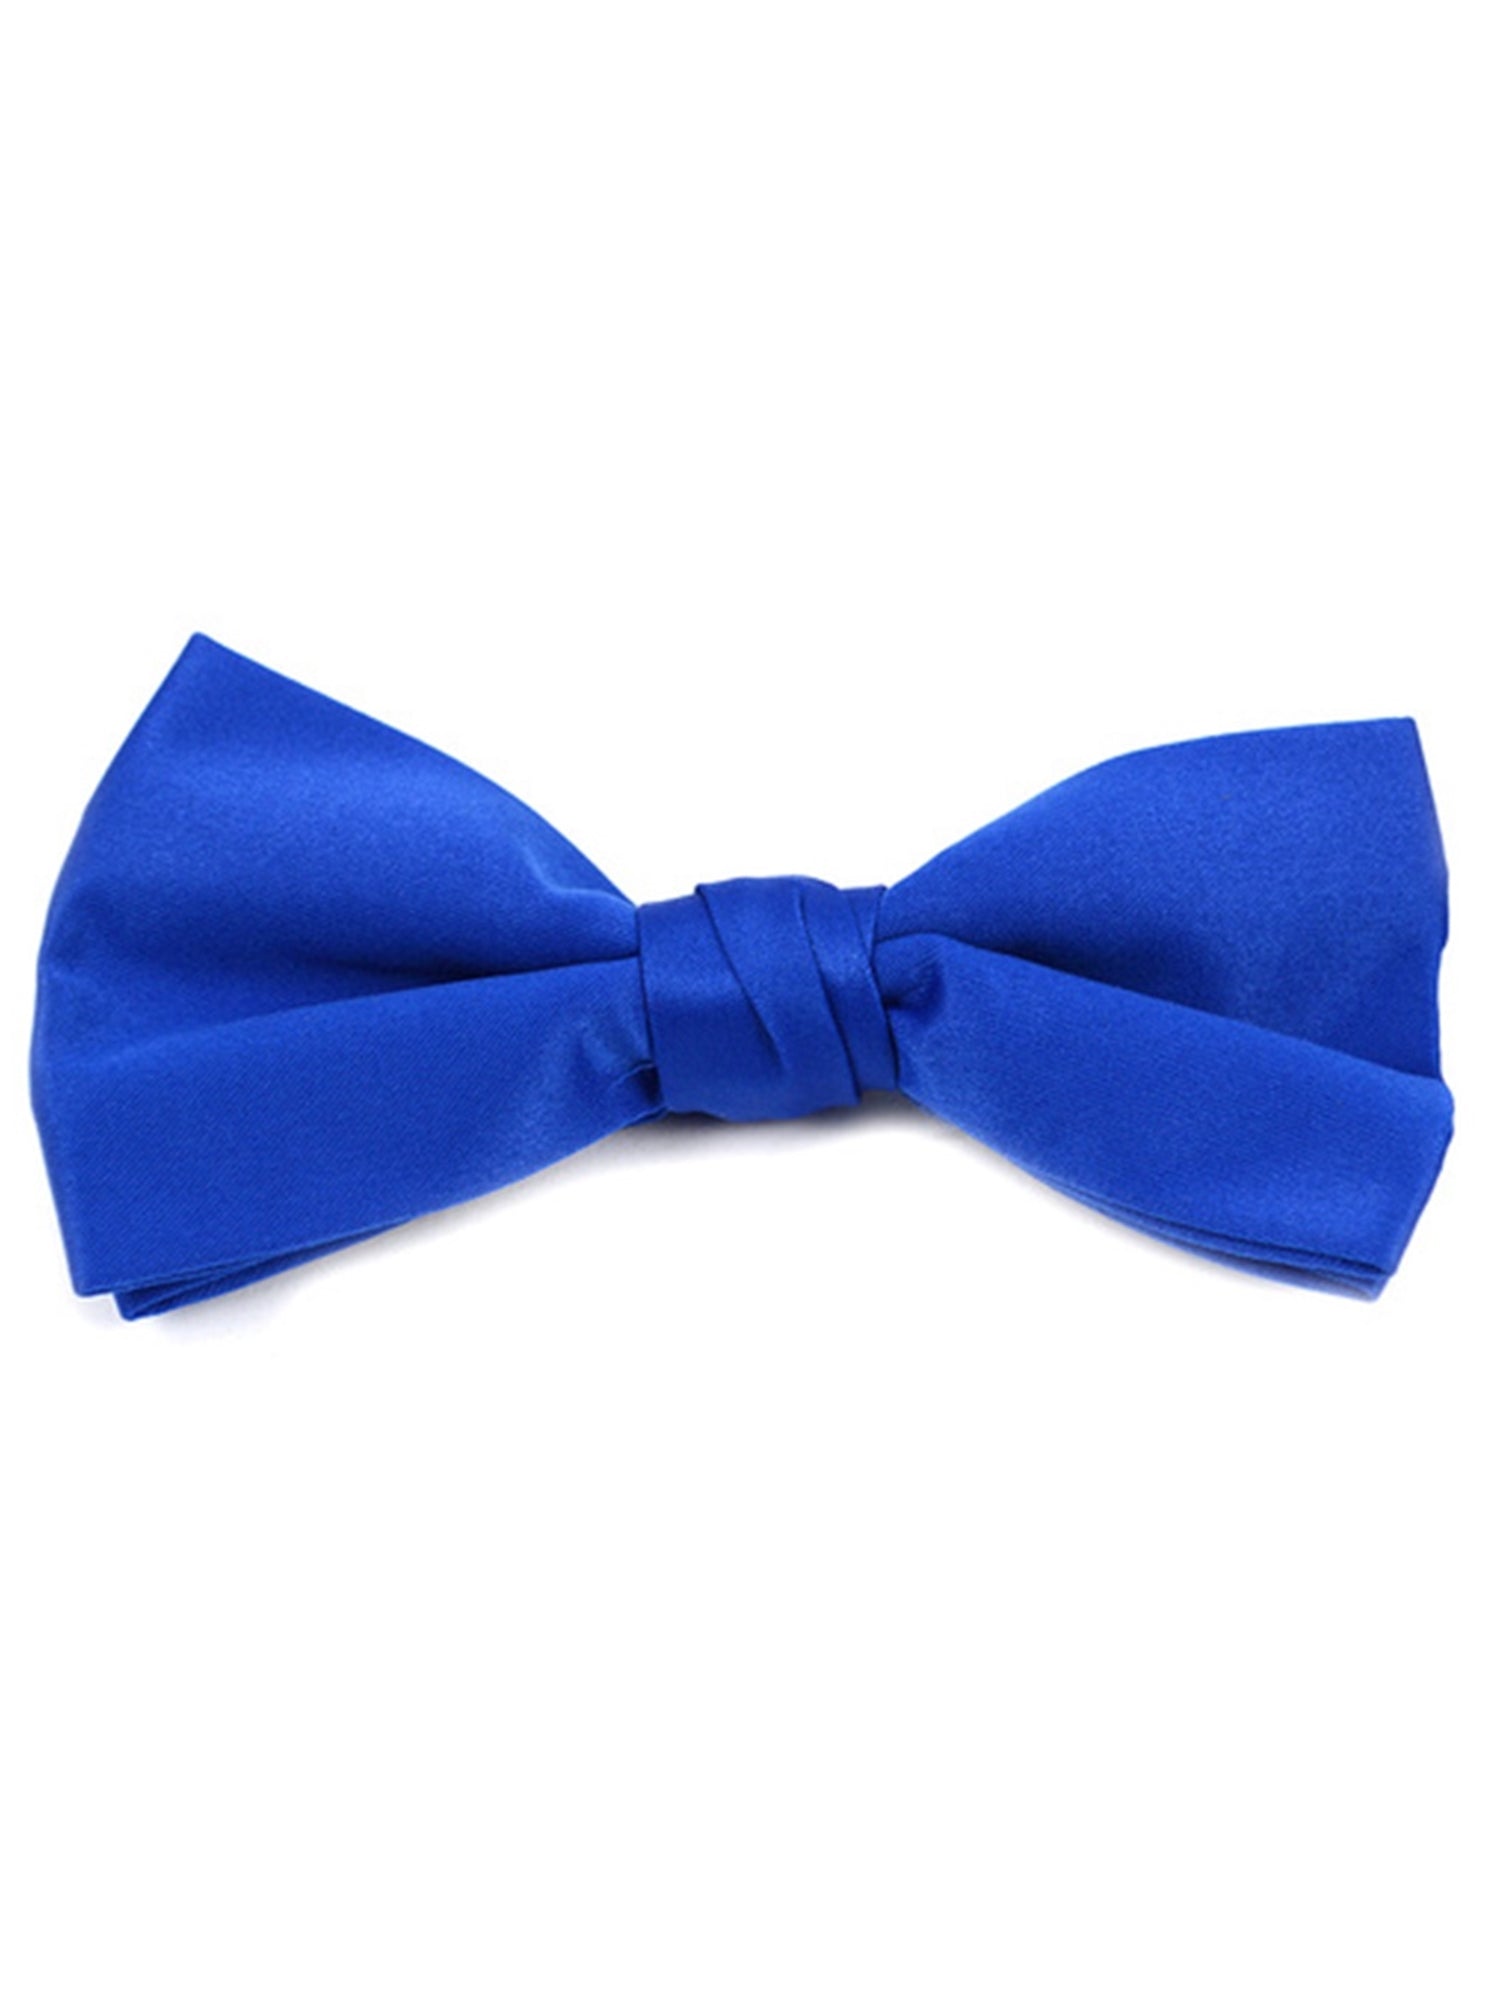 Young Boy's Pre-tied Clip On Bow Tie - Formal Tuxedo Solid Color Boy's Solid Color Bow Tie TheDapperTie Royal Blue One Size 